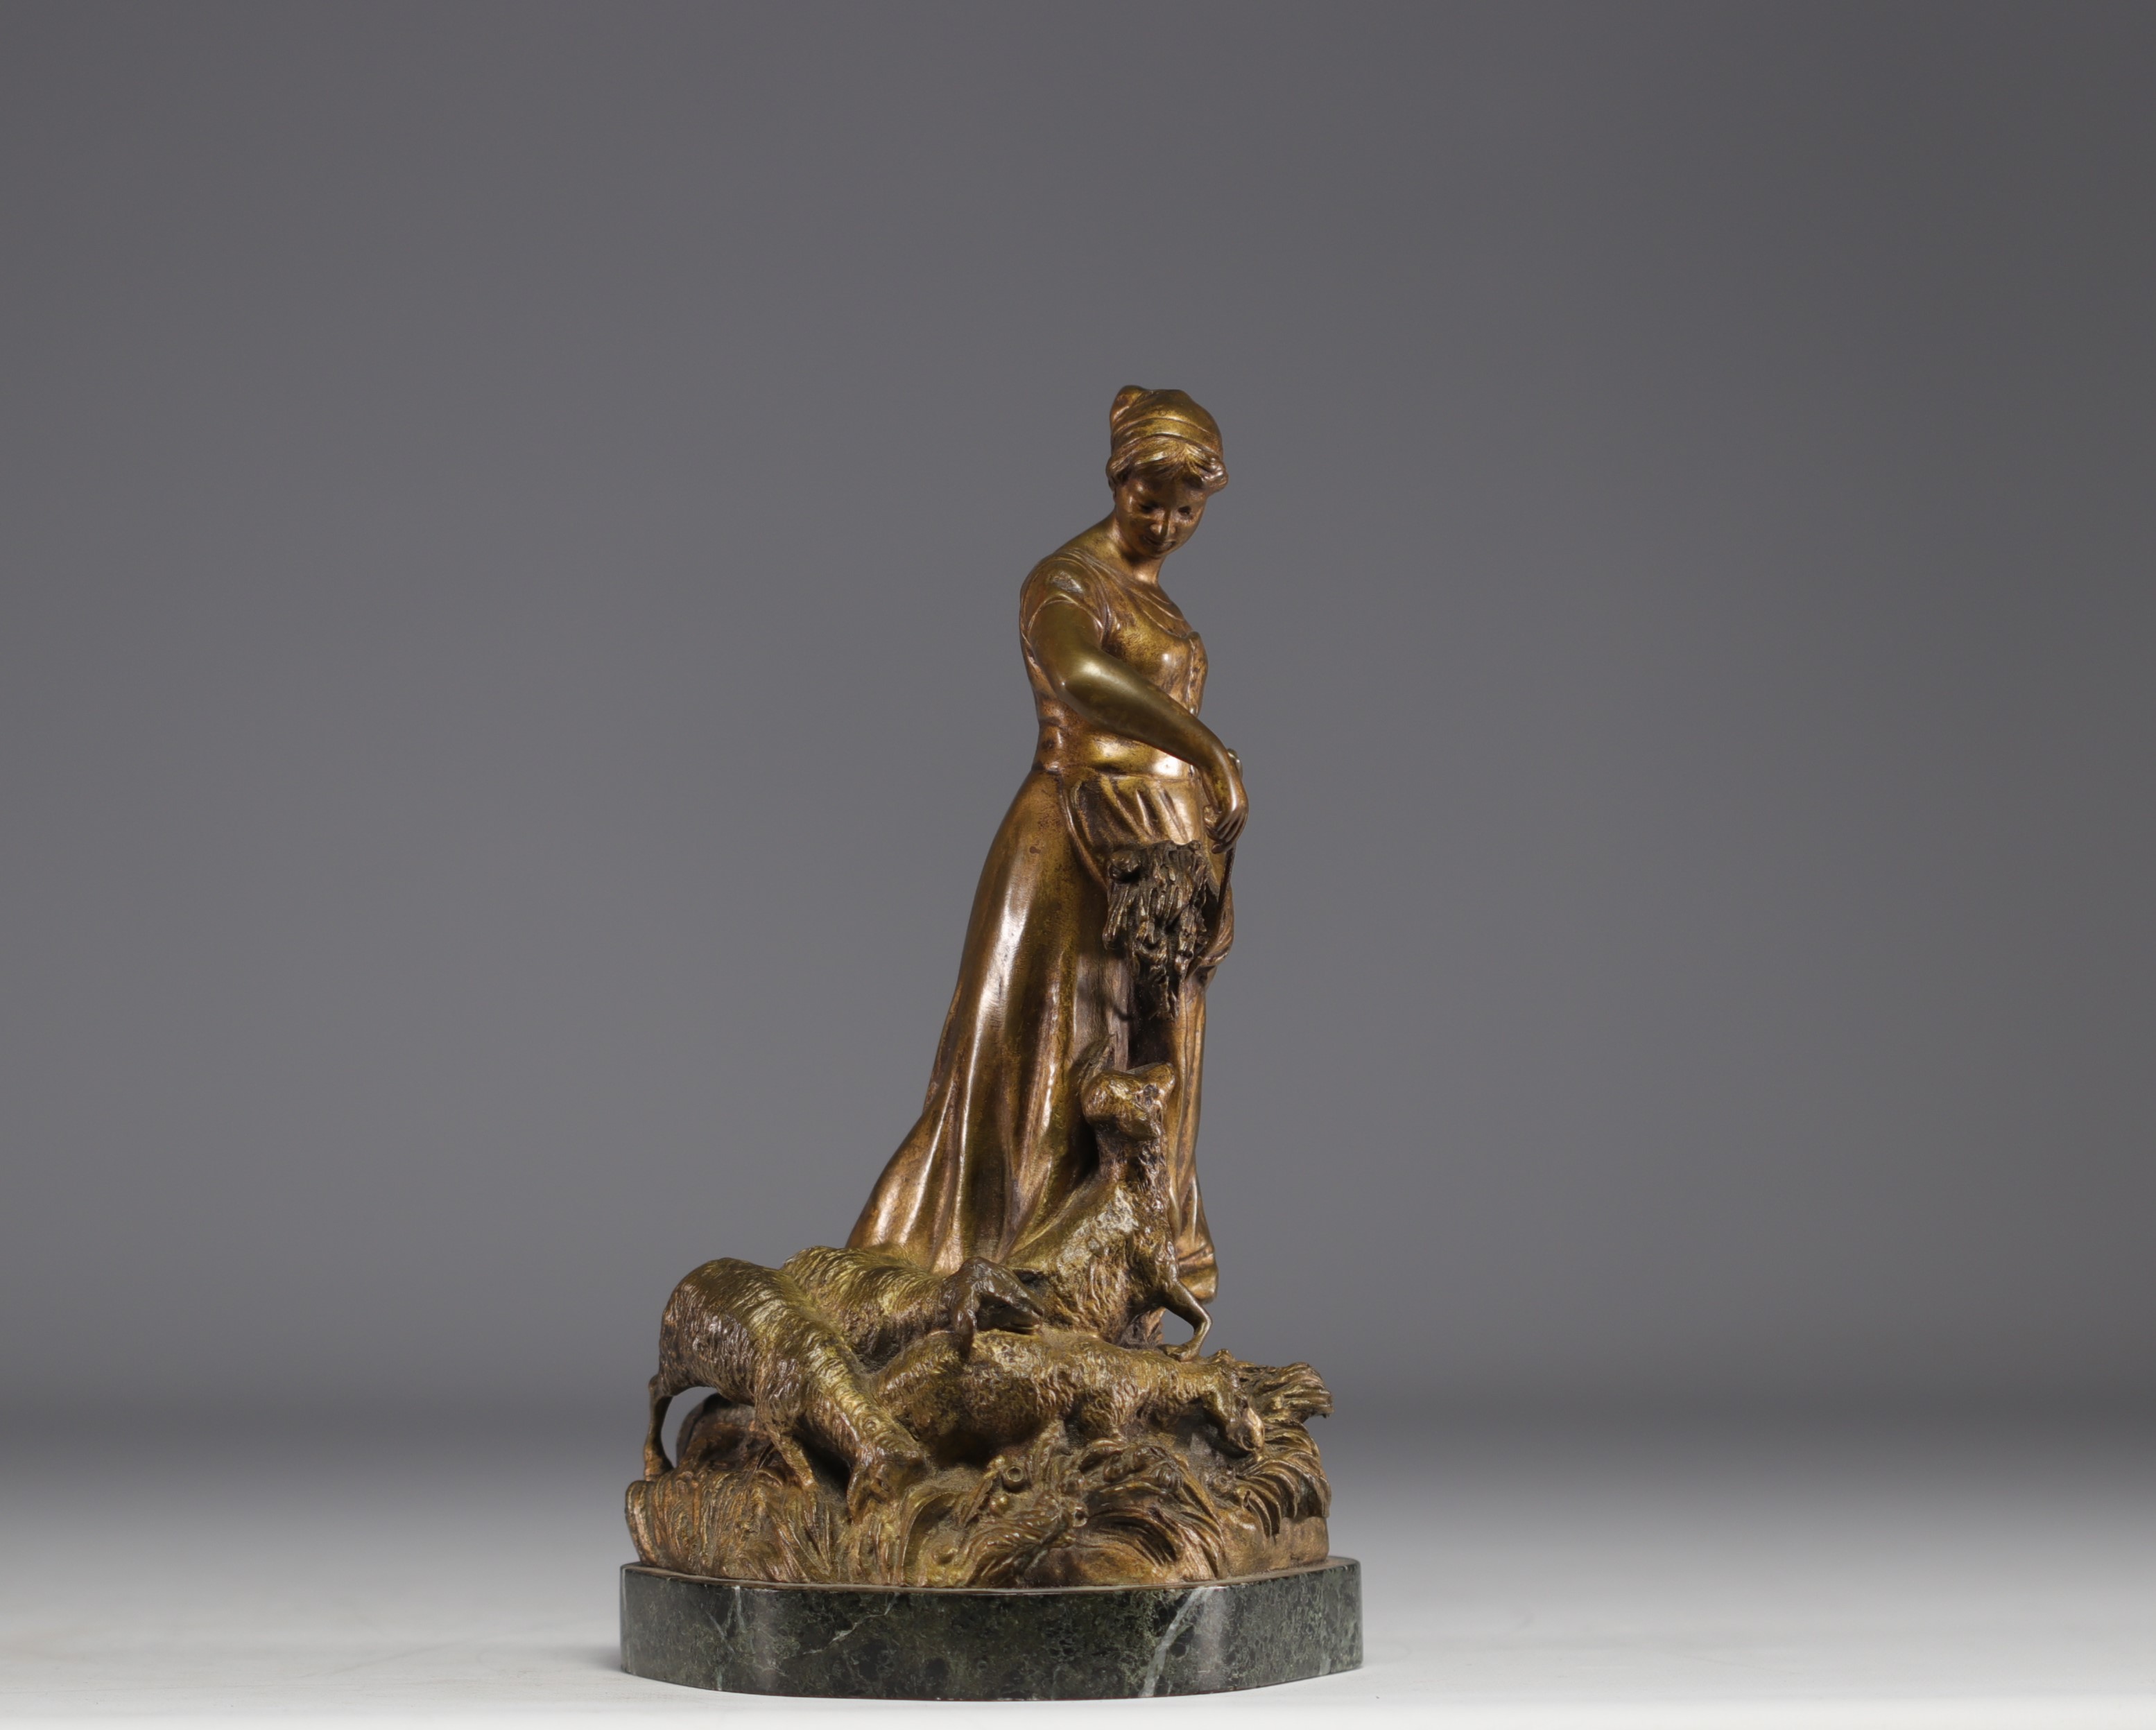 T. CARTIER (1879-1936) "The shepherdess and her sheep" bronze with golden patina. - Image 4 of 5